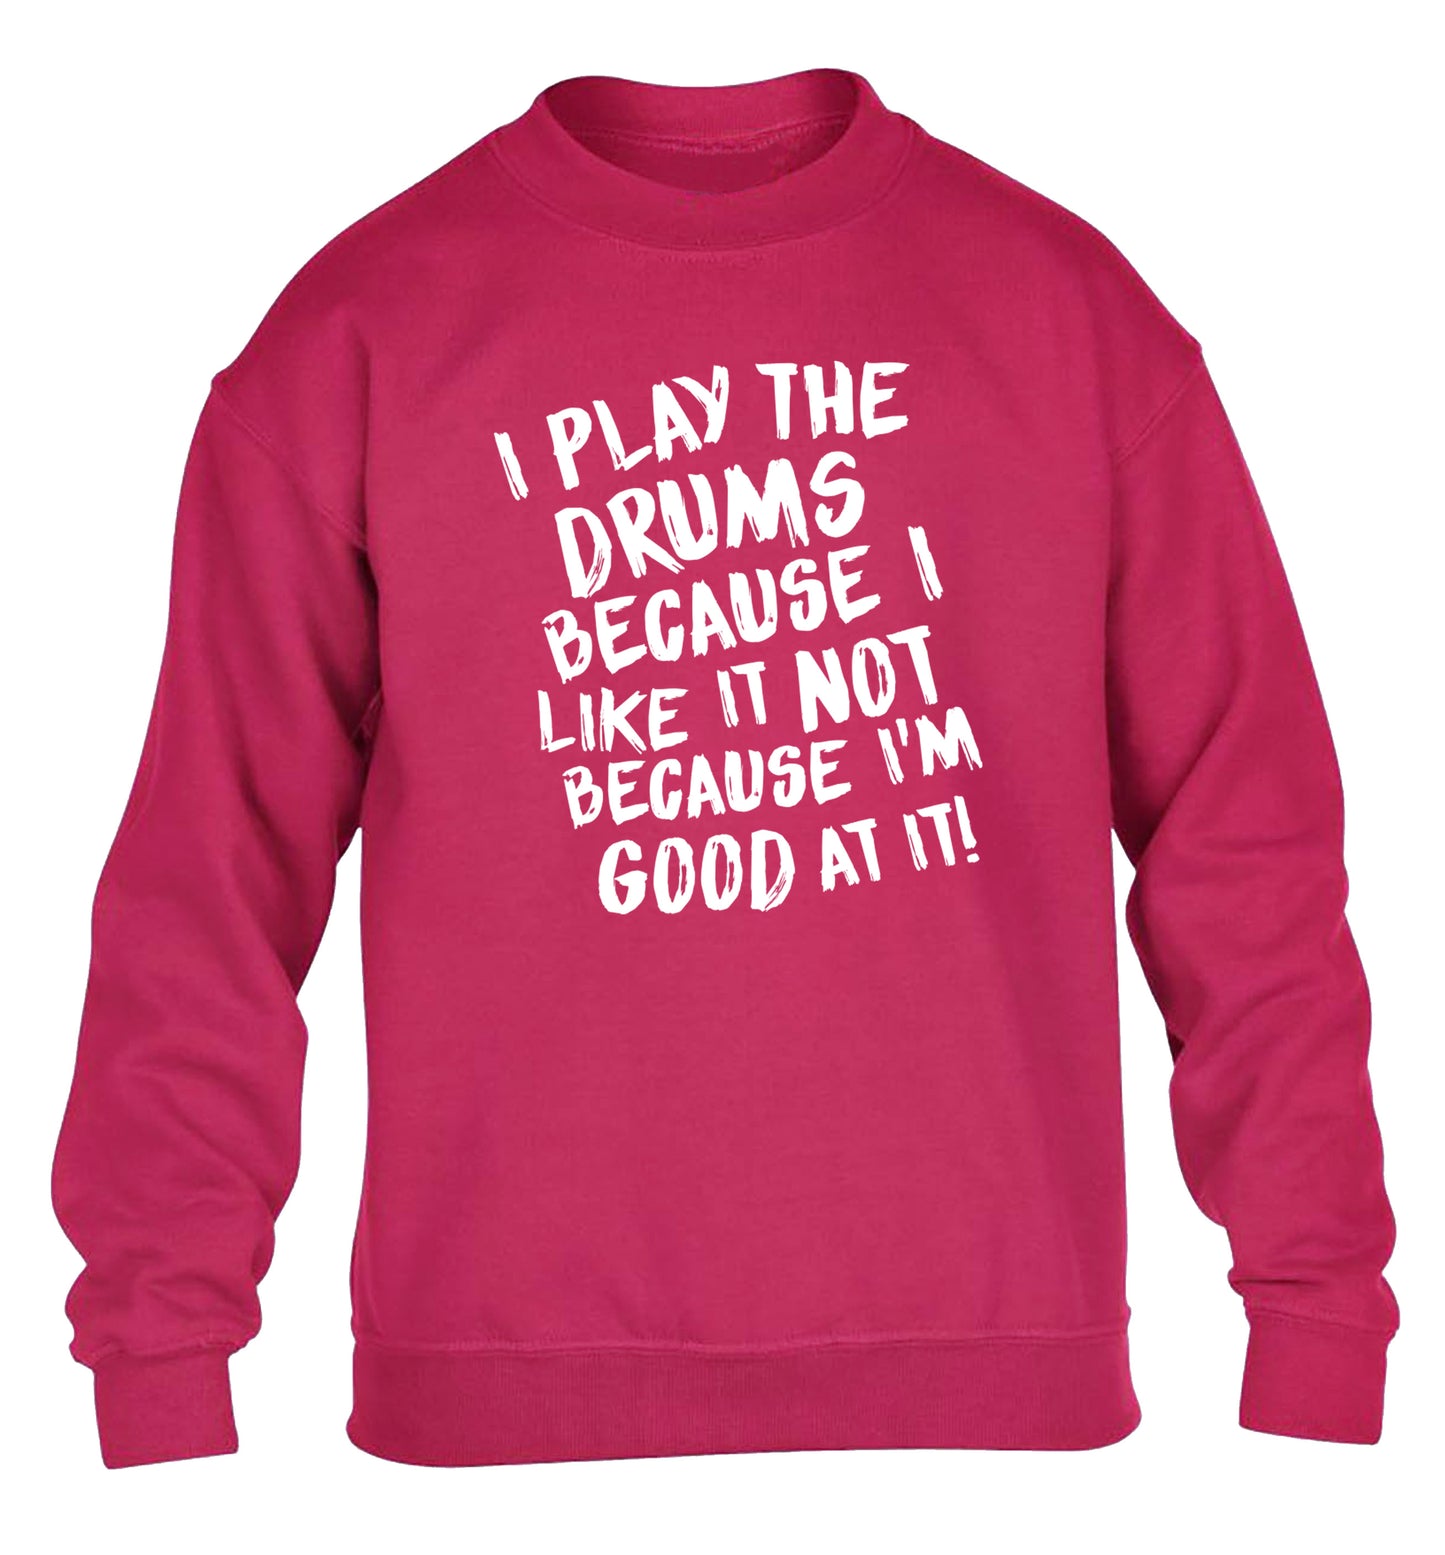 I play the drums because I like it not because I'm good at it children's pink sweater 12-14 Years